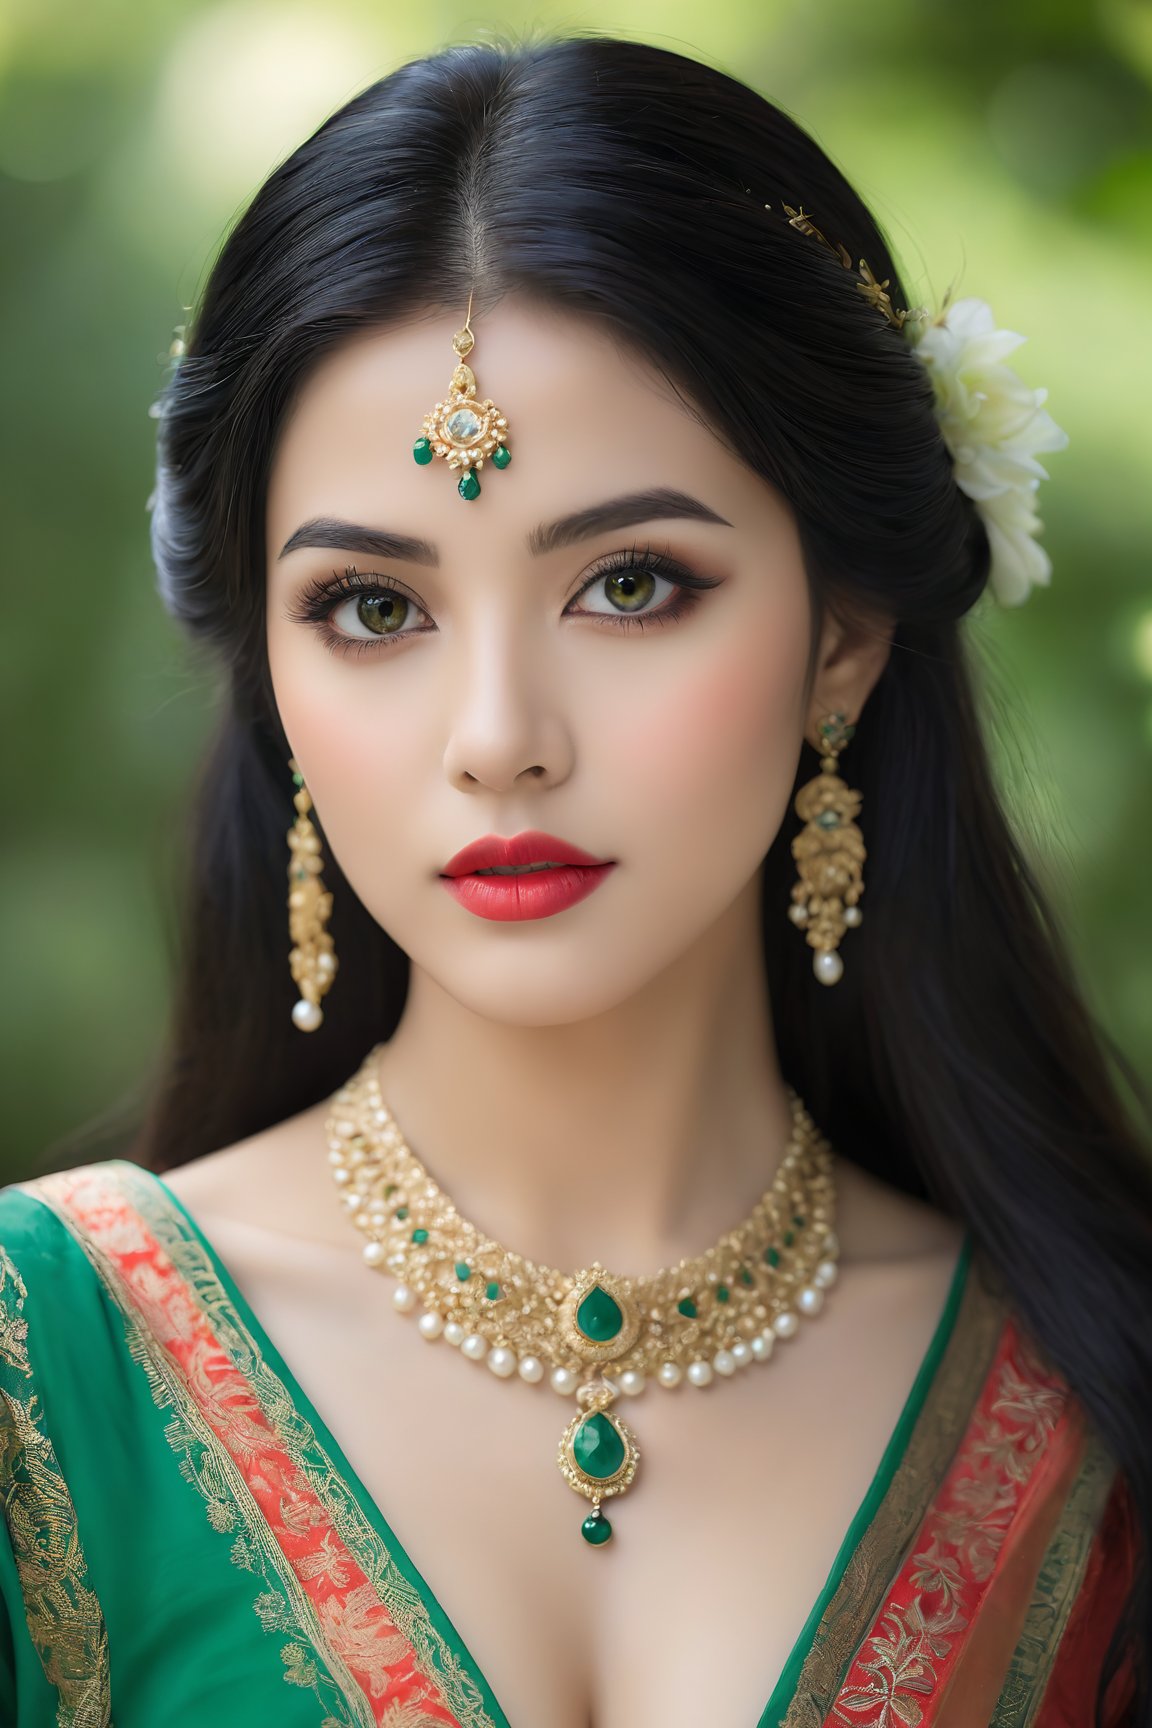 (best quality,highres),detailed eyes,detailed lips,flowing black hair,traditional attire,vibrant colors,natural lighting,lush green background,ethereal atmosphere,subtle makeup,elegant jewelry,confident expression,traditional patterns.  <lora:HUBG Hyper SDXL_lora :0.8>